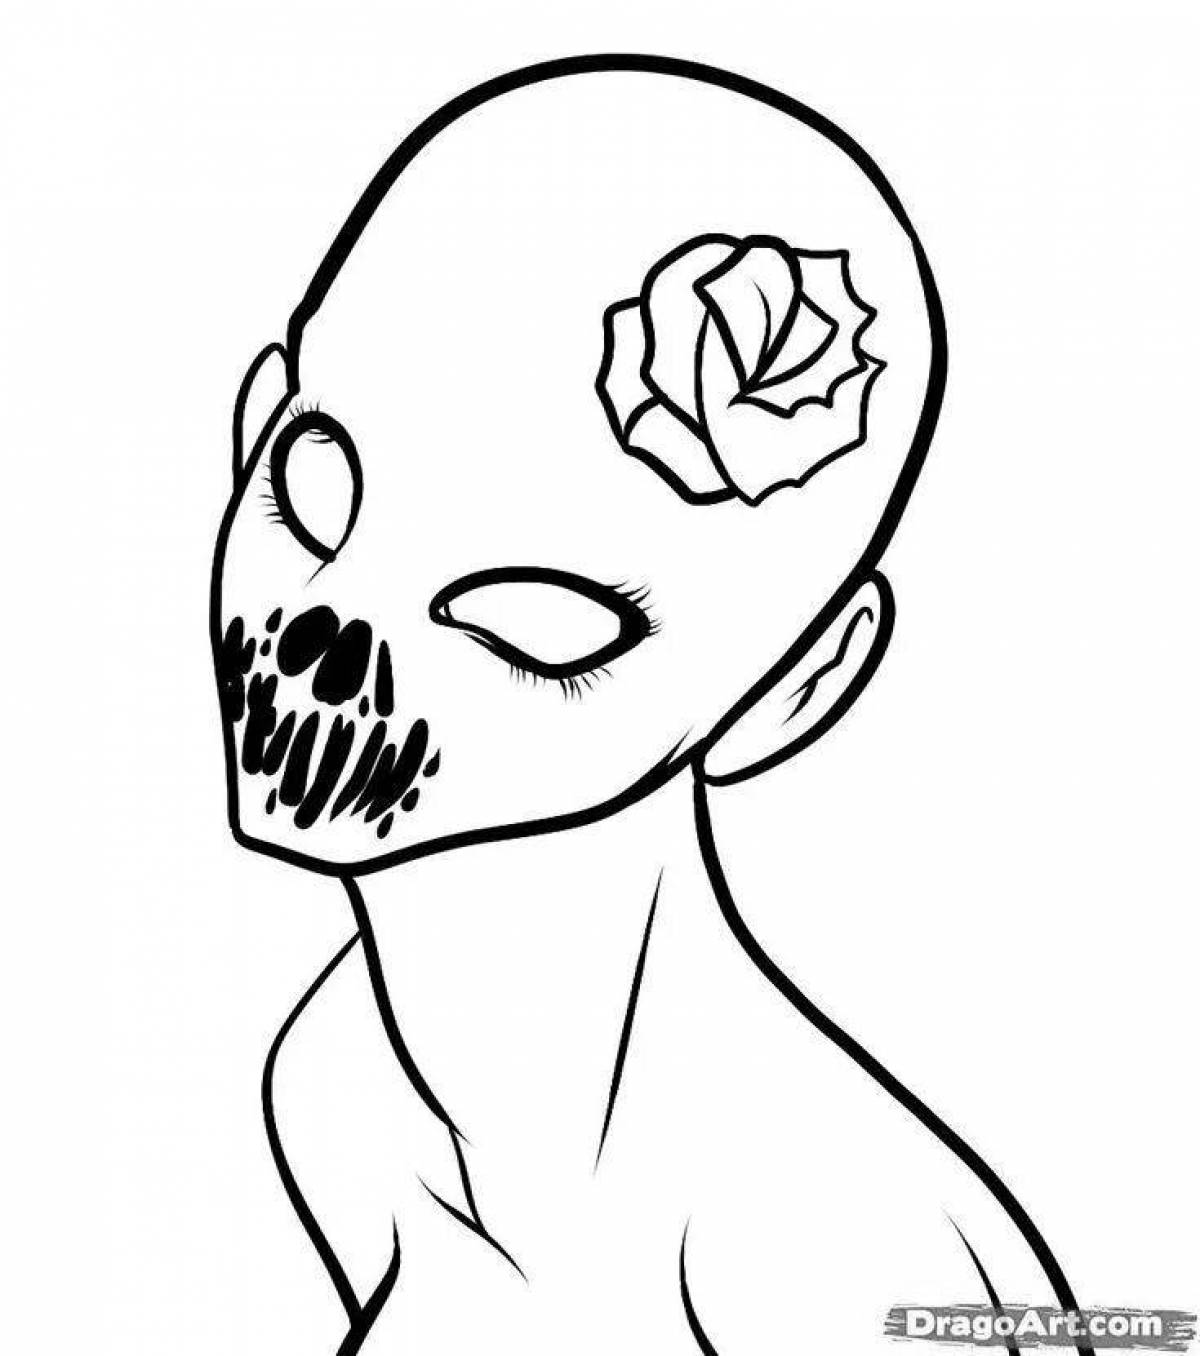 Coloring page scary but beautiful: horrible